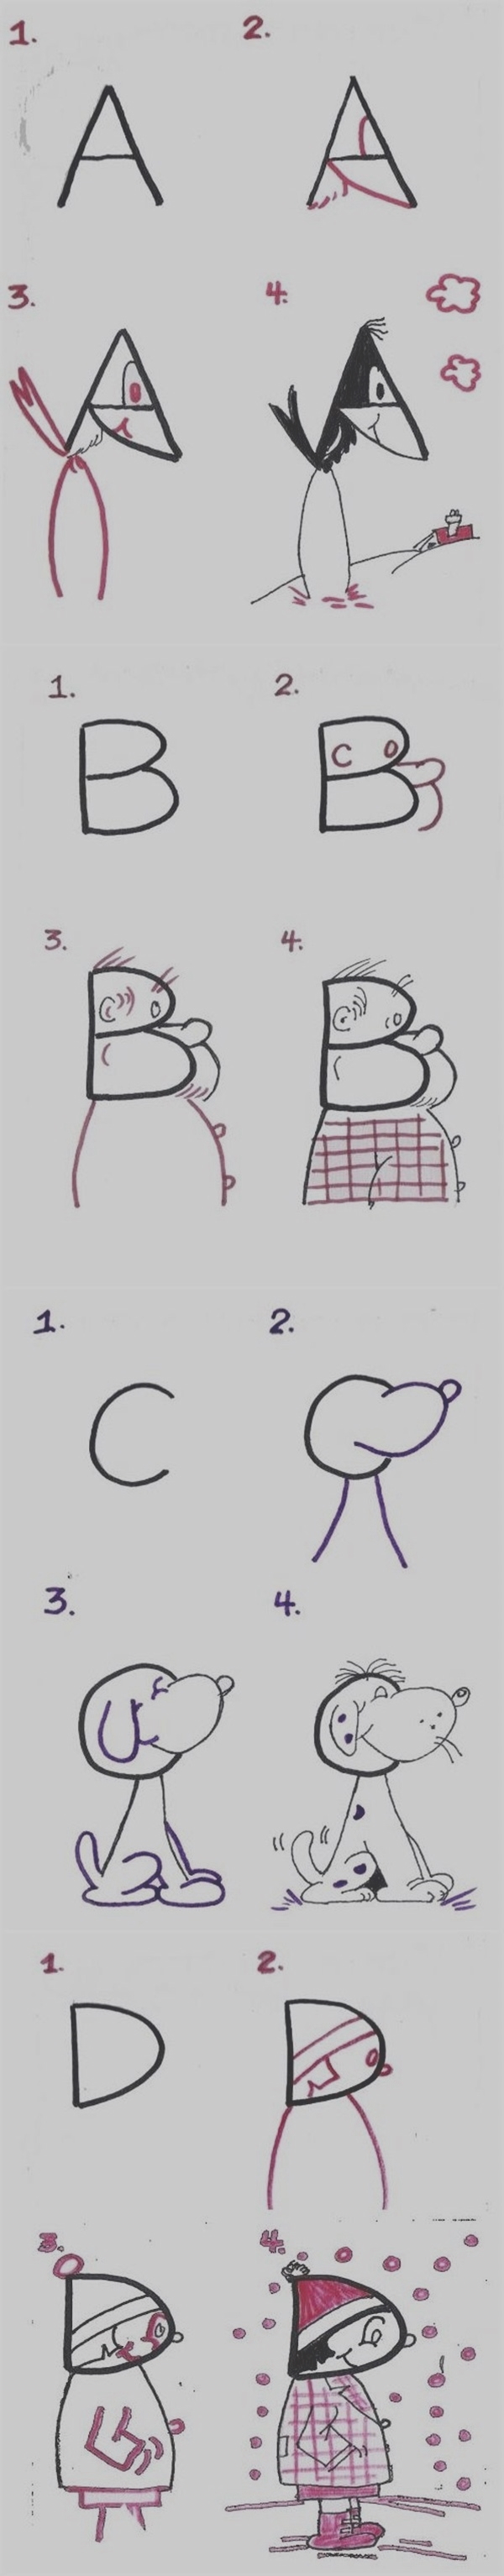 Easy Step by Step Art Drawings to Practice (2)